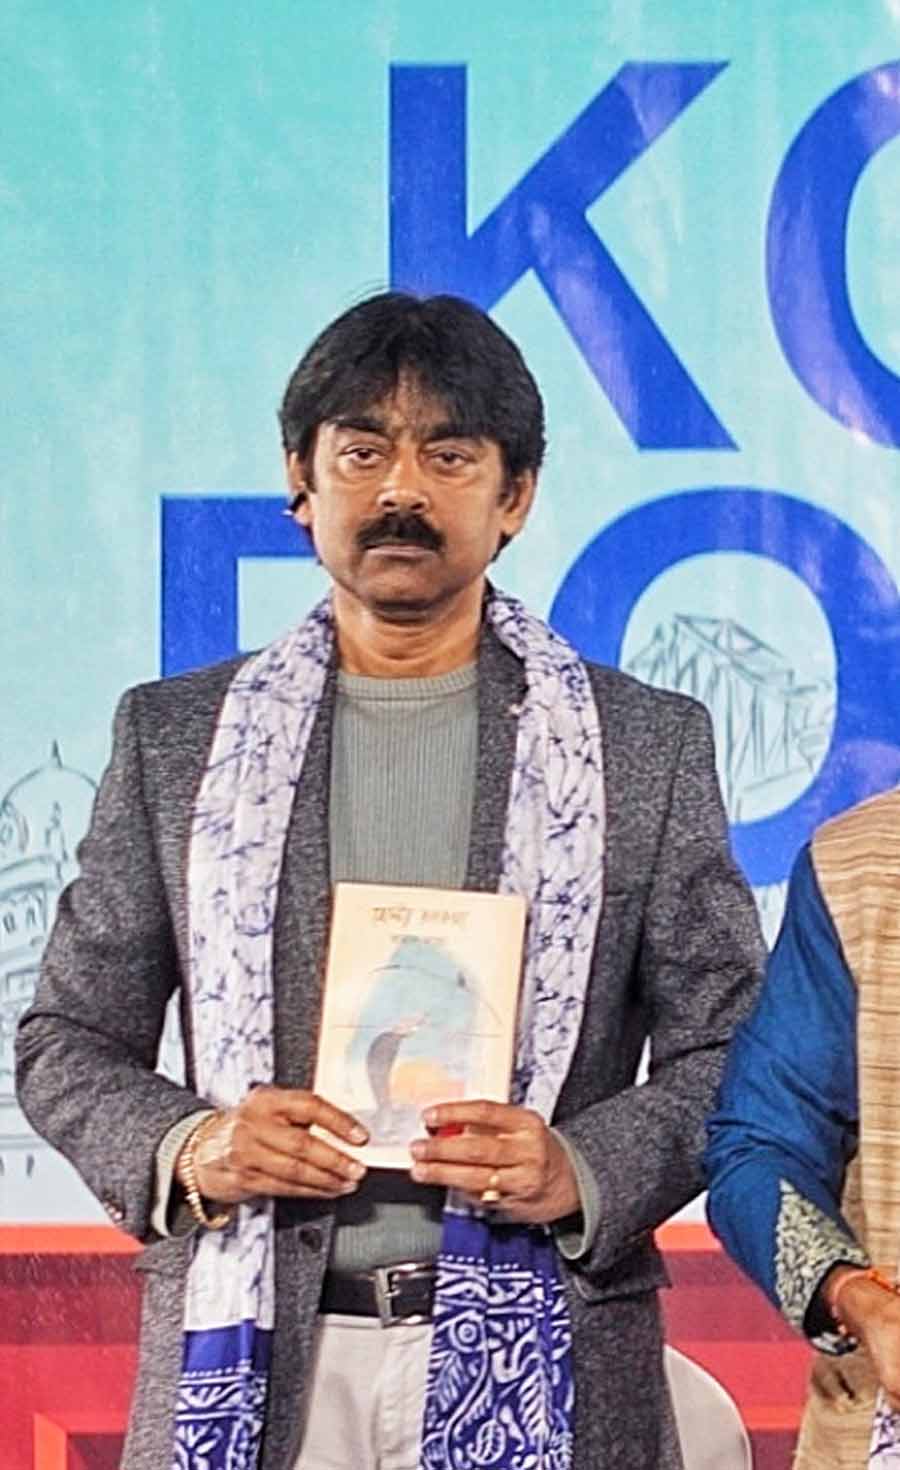 An event was organised on Thursday to launch Tamal Laha’s new book ‘Belt-er Roopkatha’ at the 47th Kolkata International Book Fair